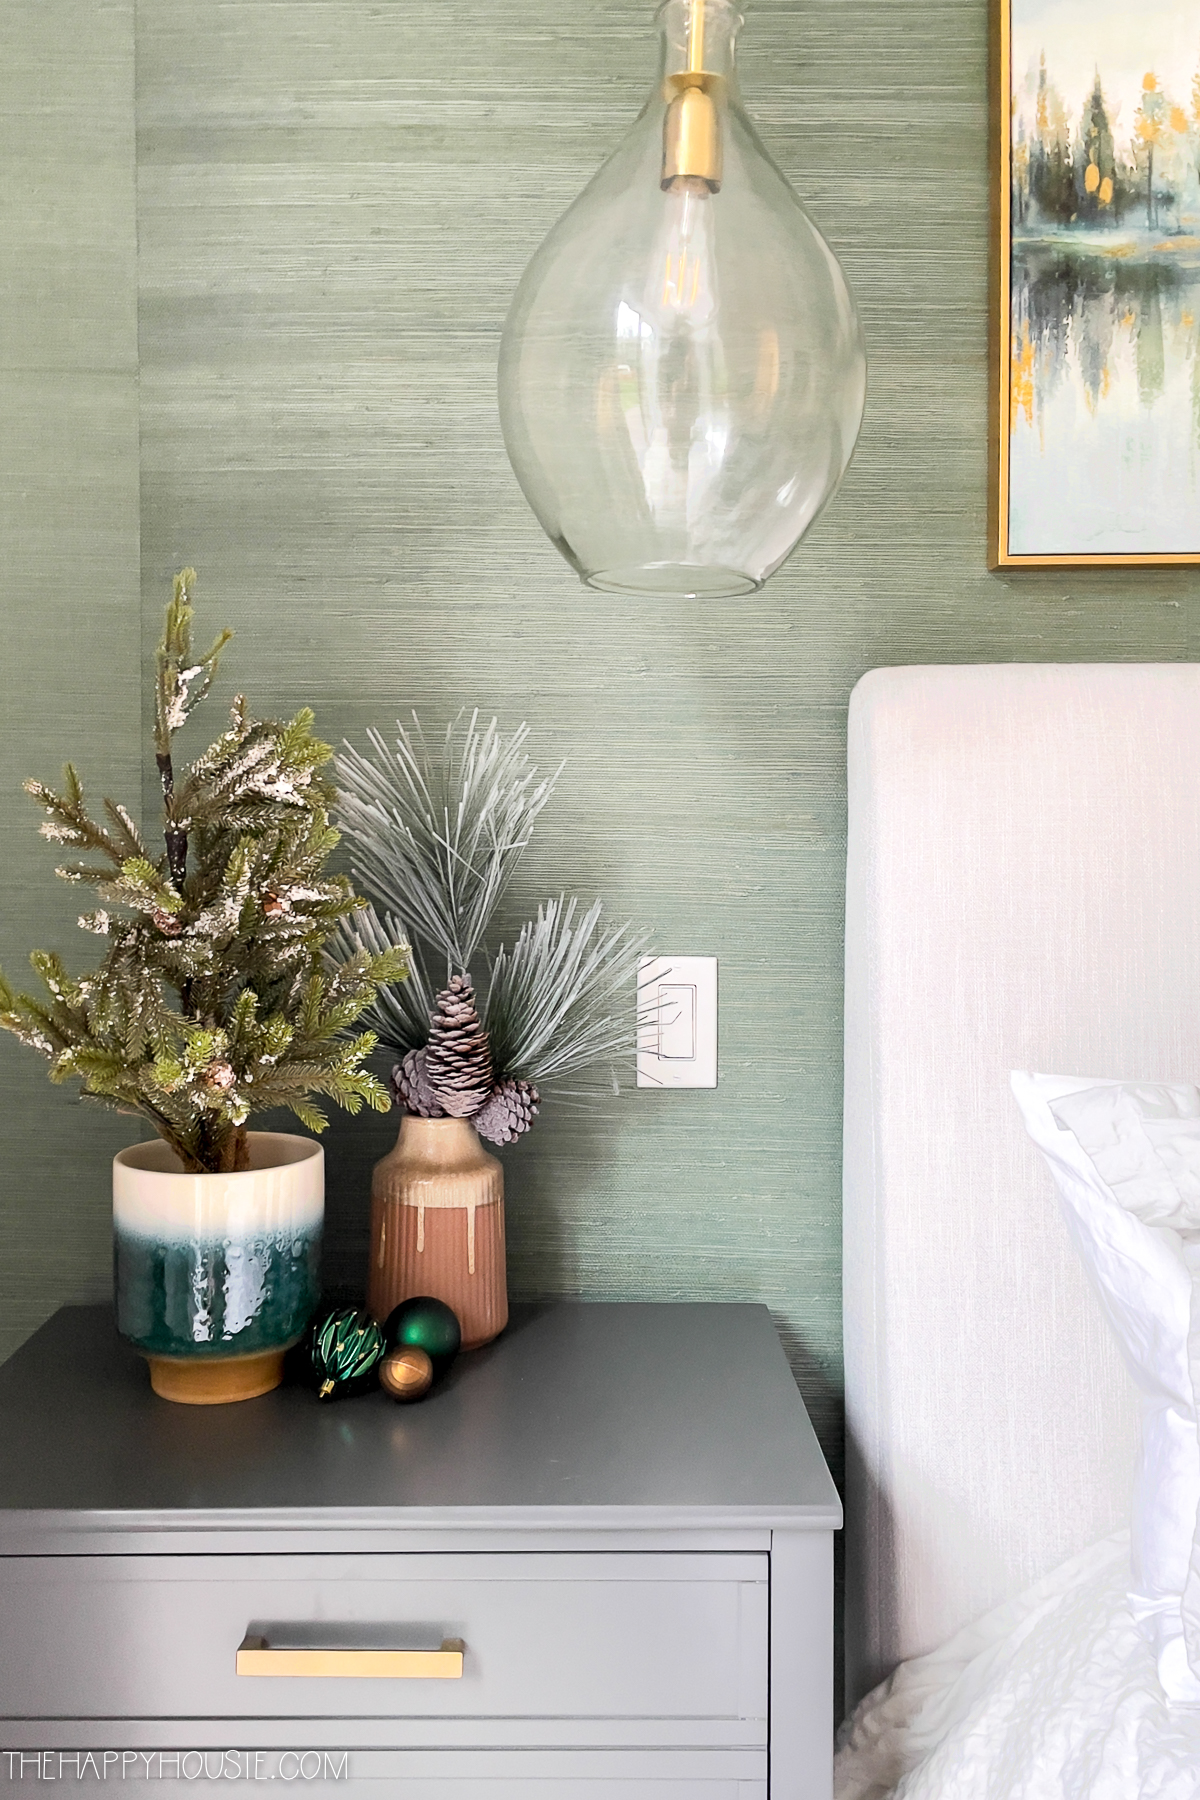 Small branches of evergreen are in vases beside the bed.